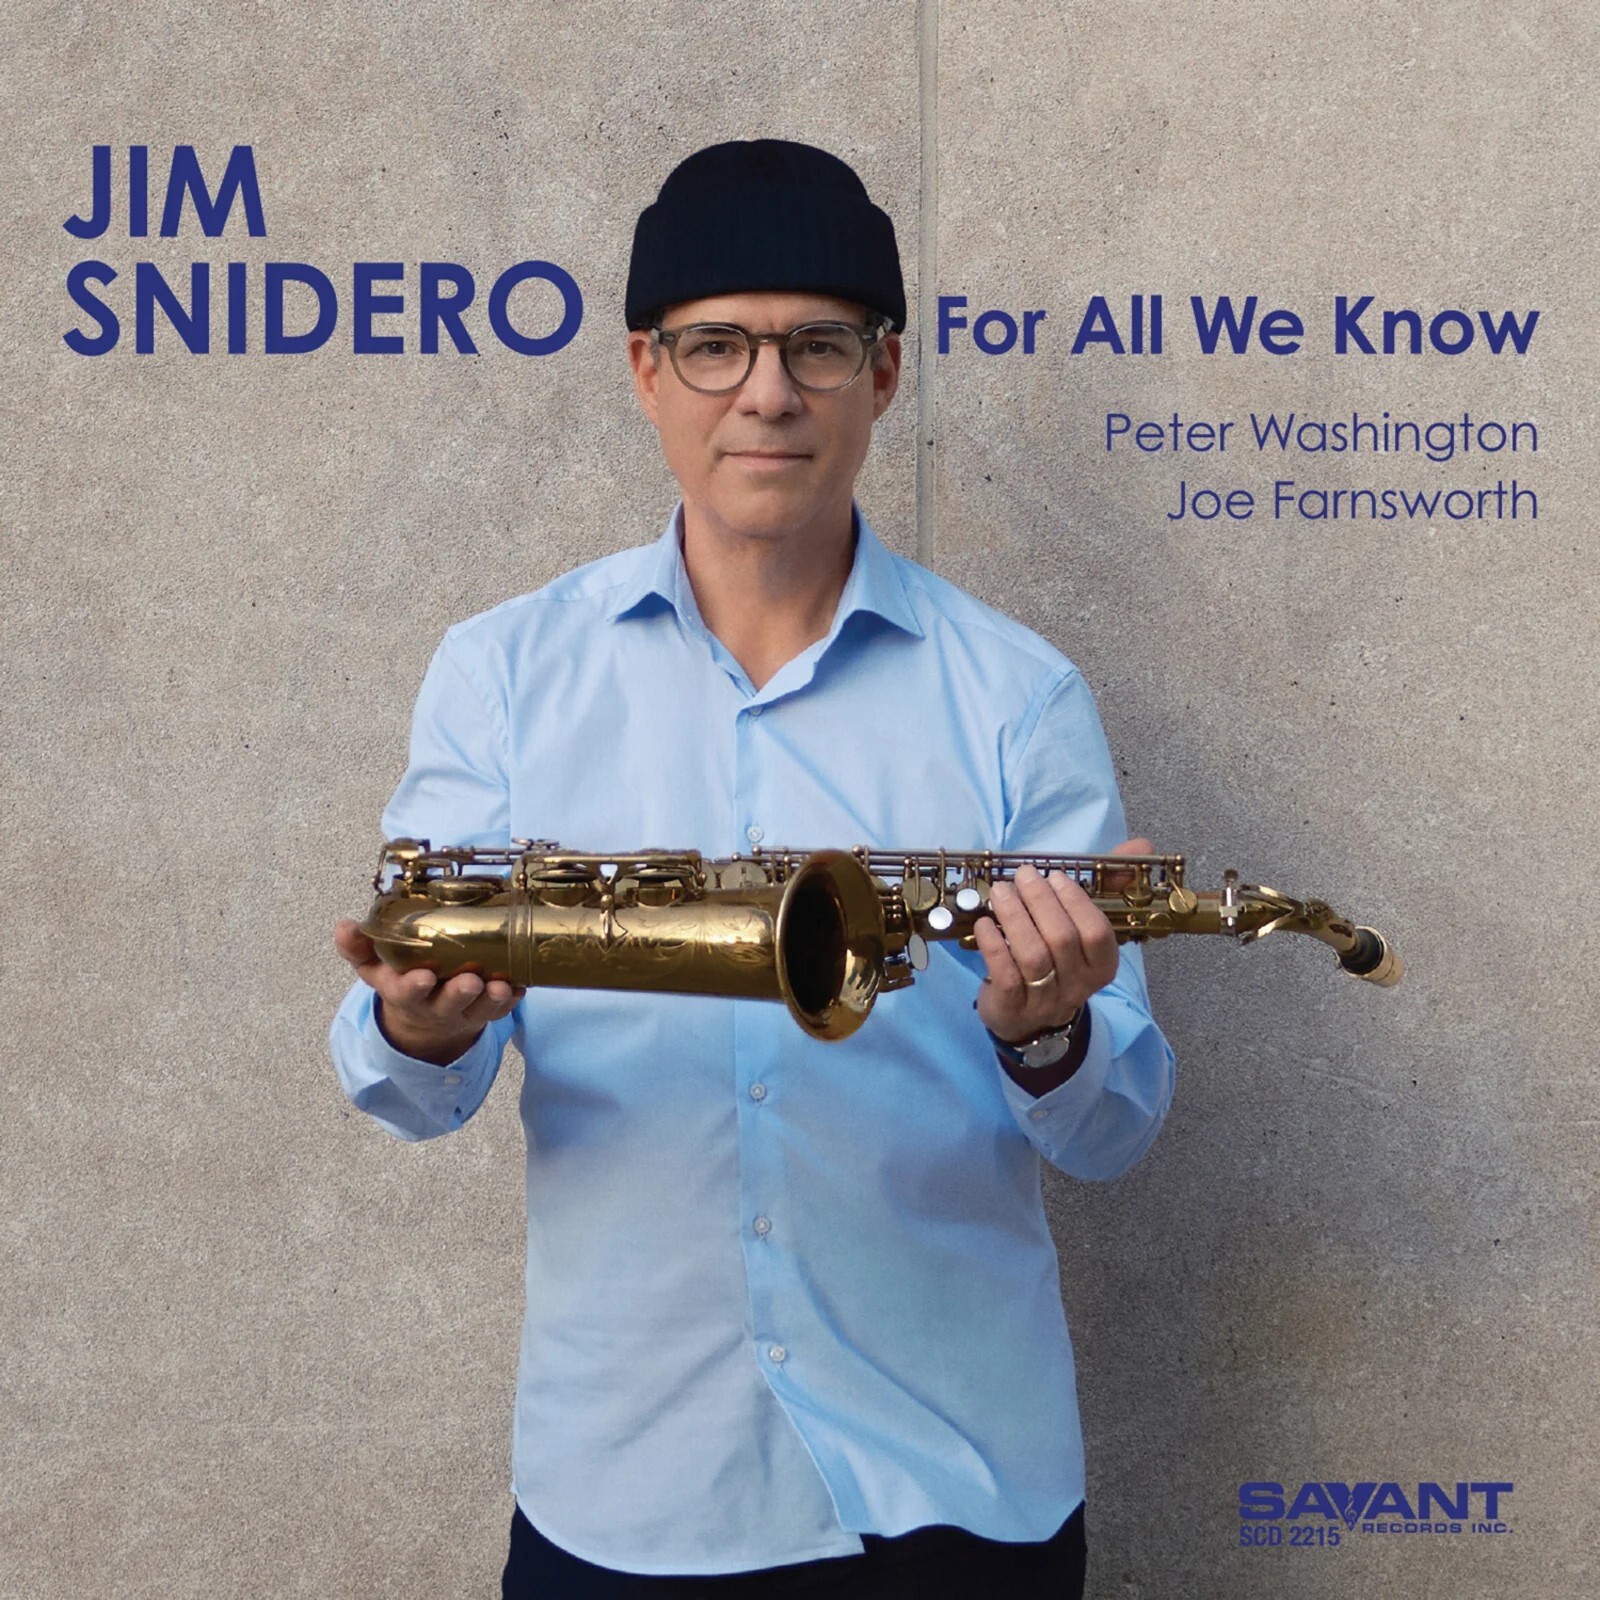 For All we Know - Jim Snidero